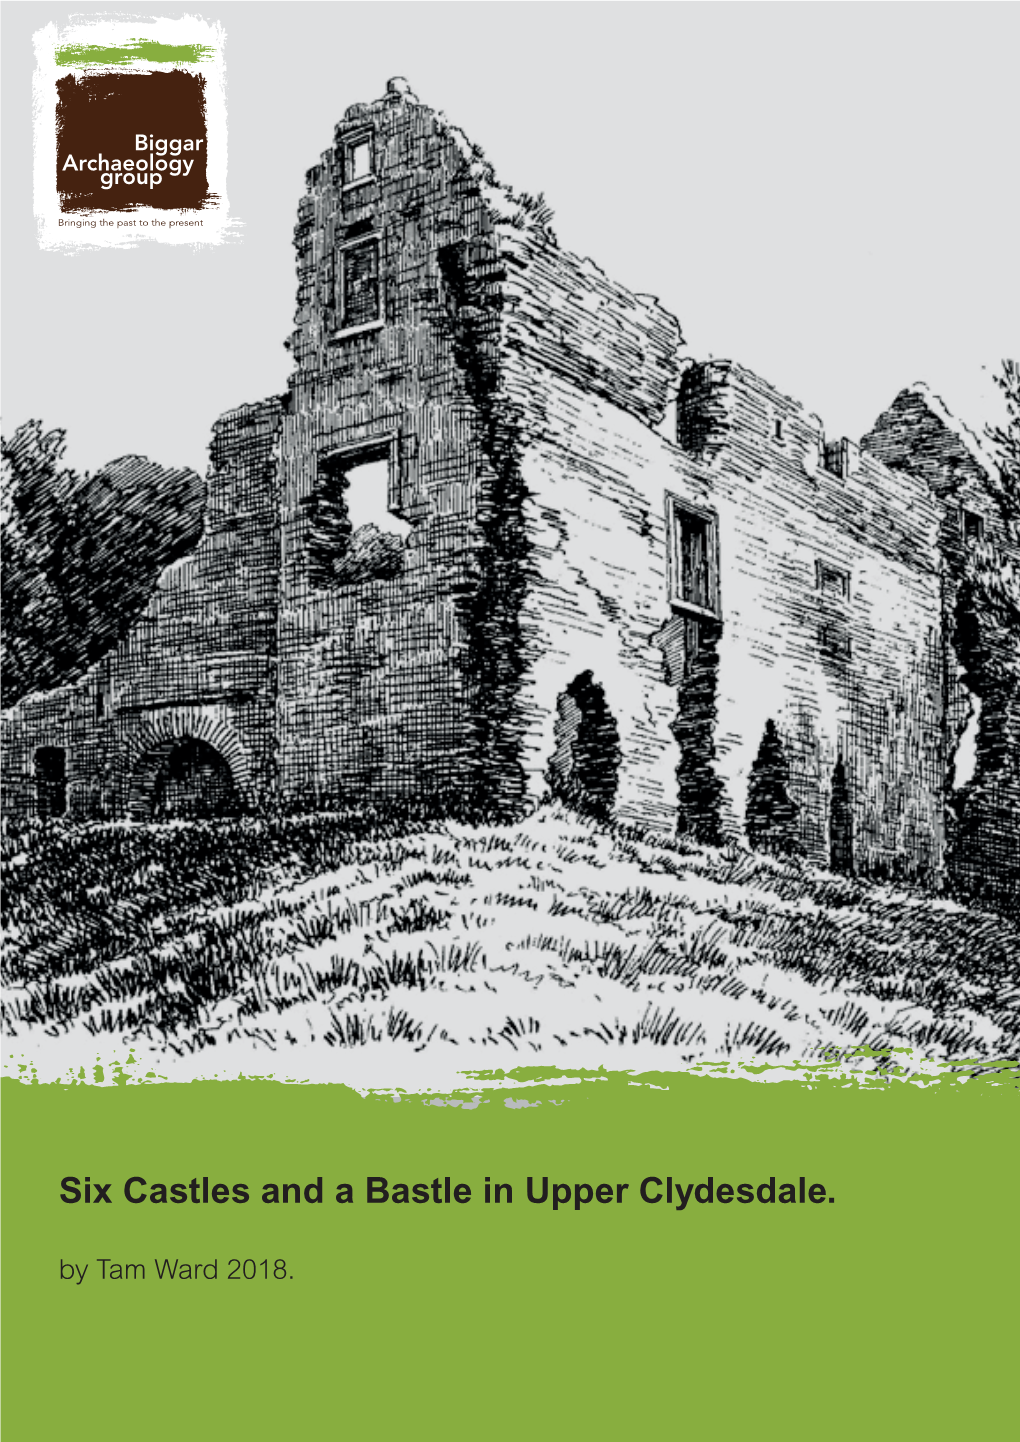 Six Castles and a Bastle in Upper Clydesdale. by Tam Ward 2018